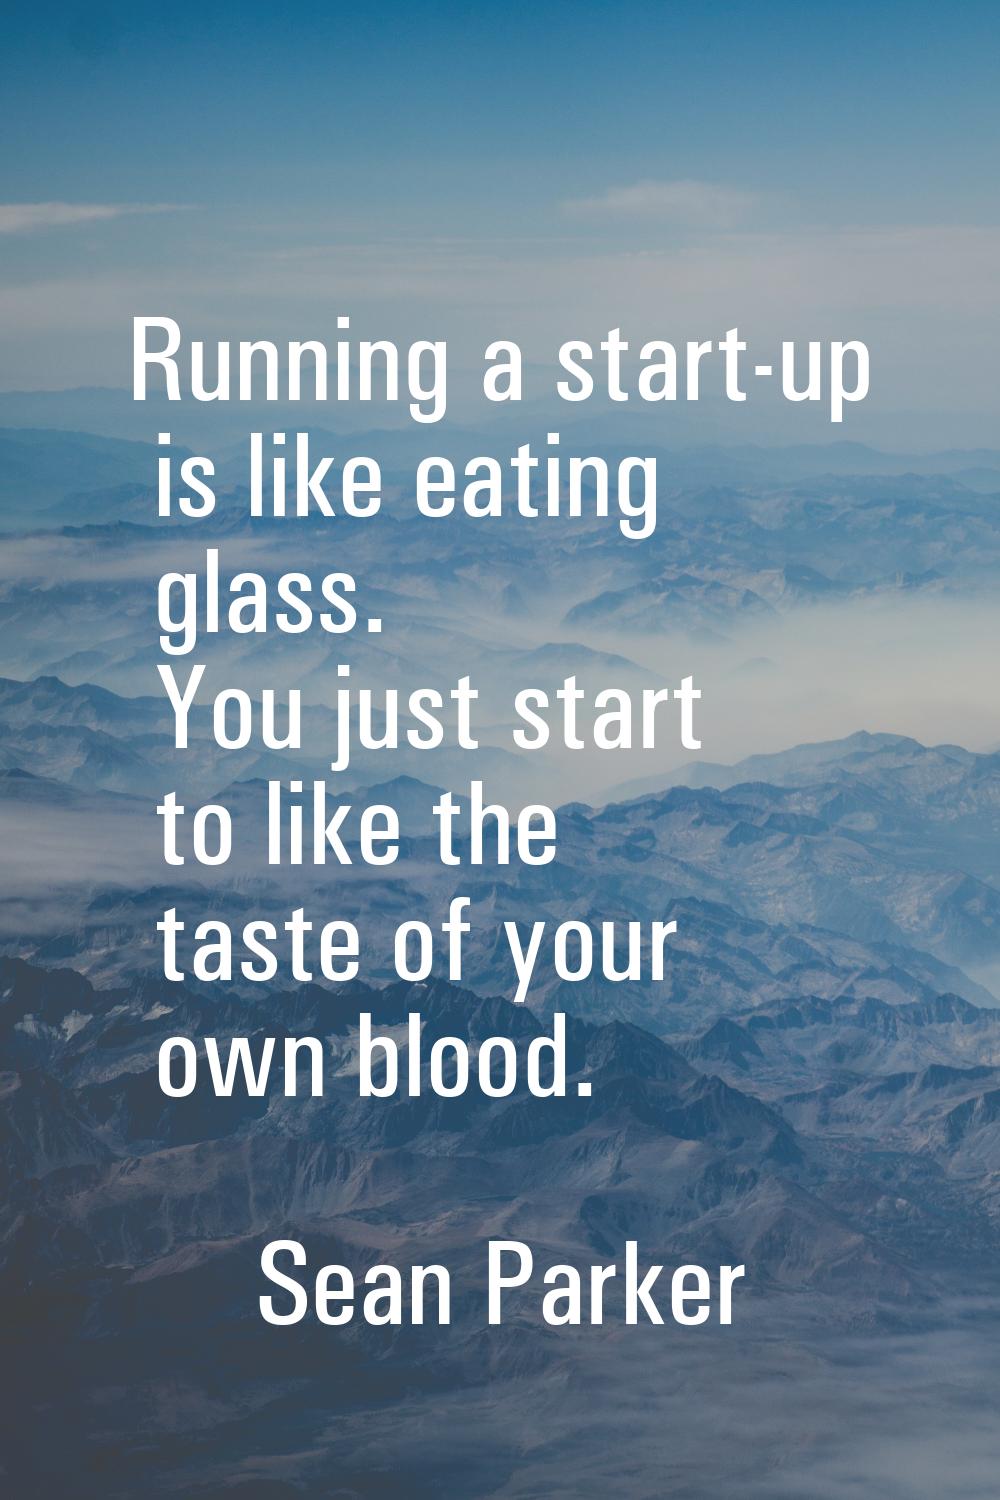 Running a start-up is like eating glass. You just start to like the taste of your own blood.